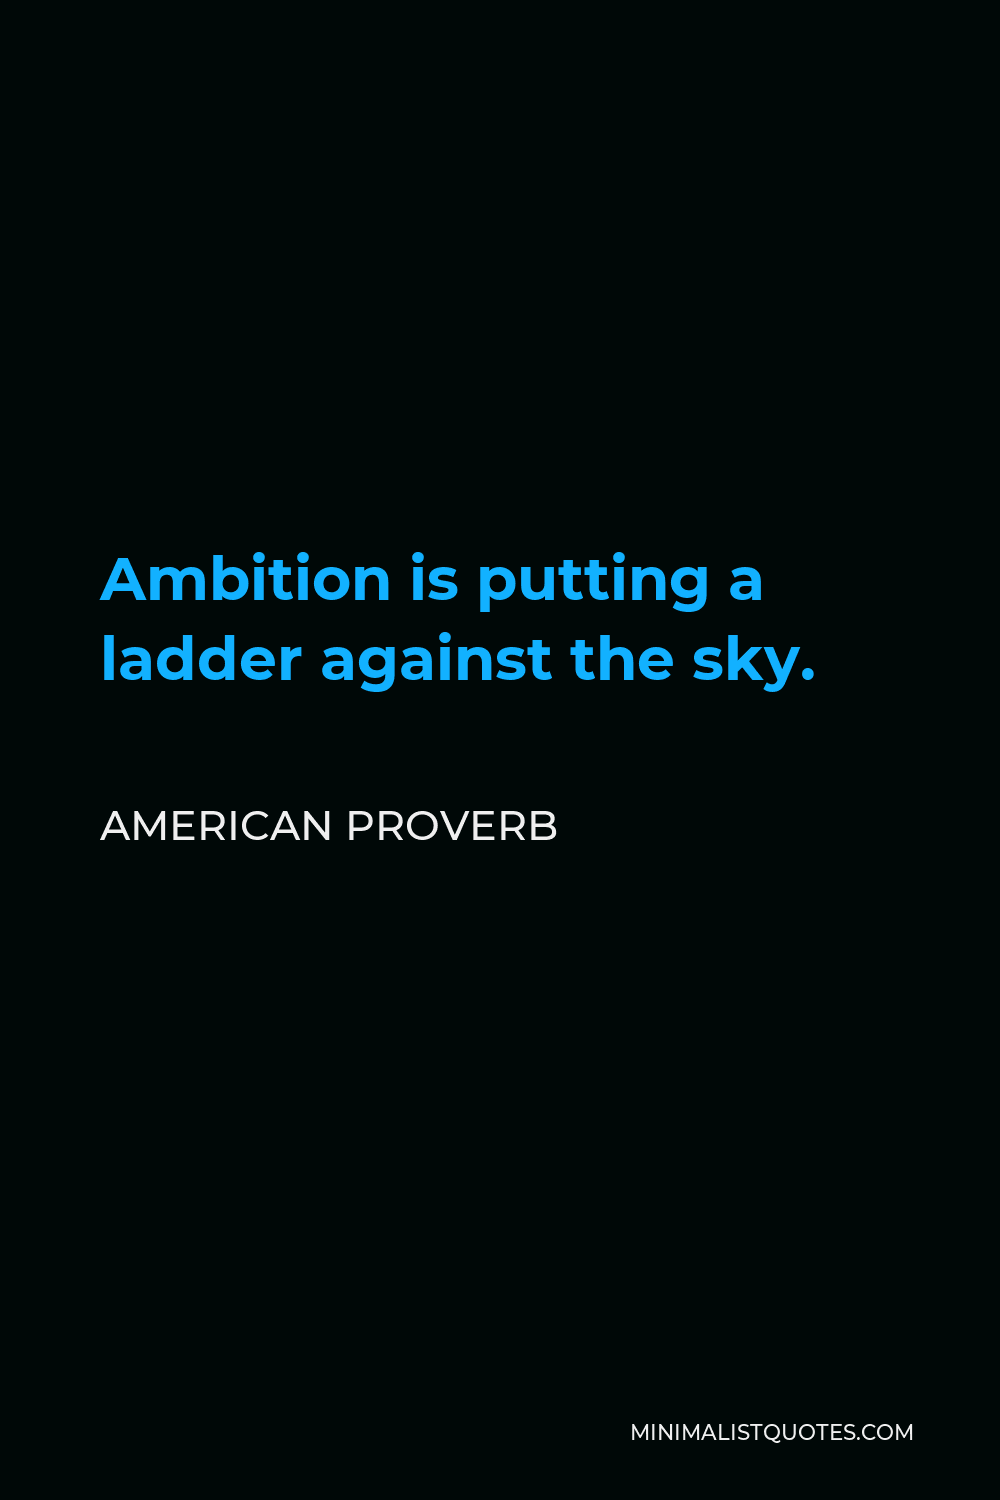 American Proverb Quote - Ambition is putting a ladder against the sky.